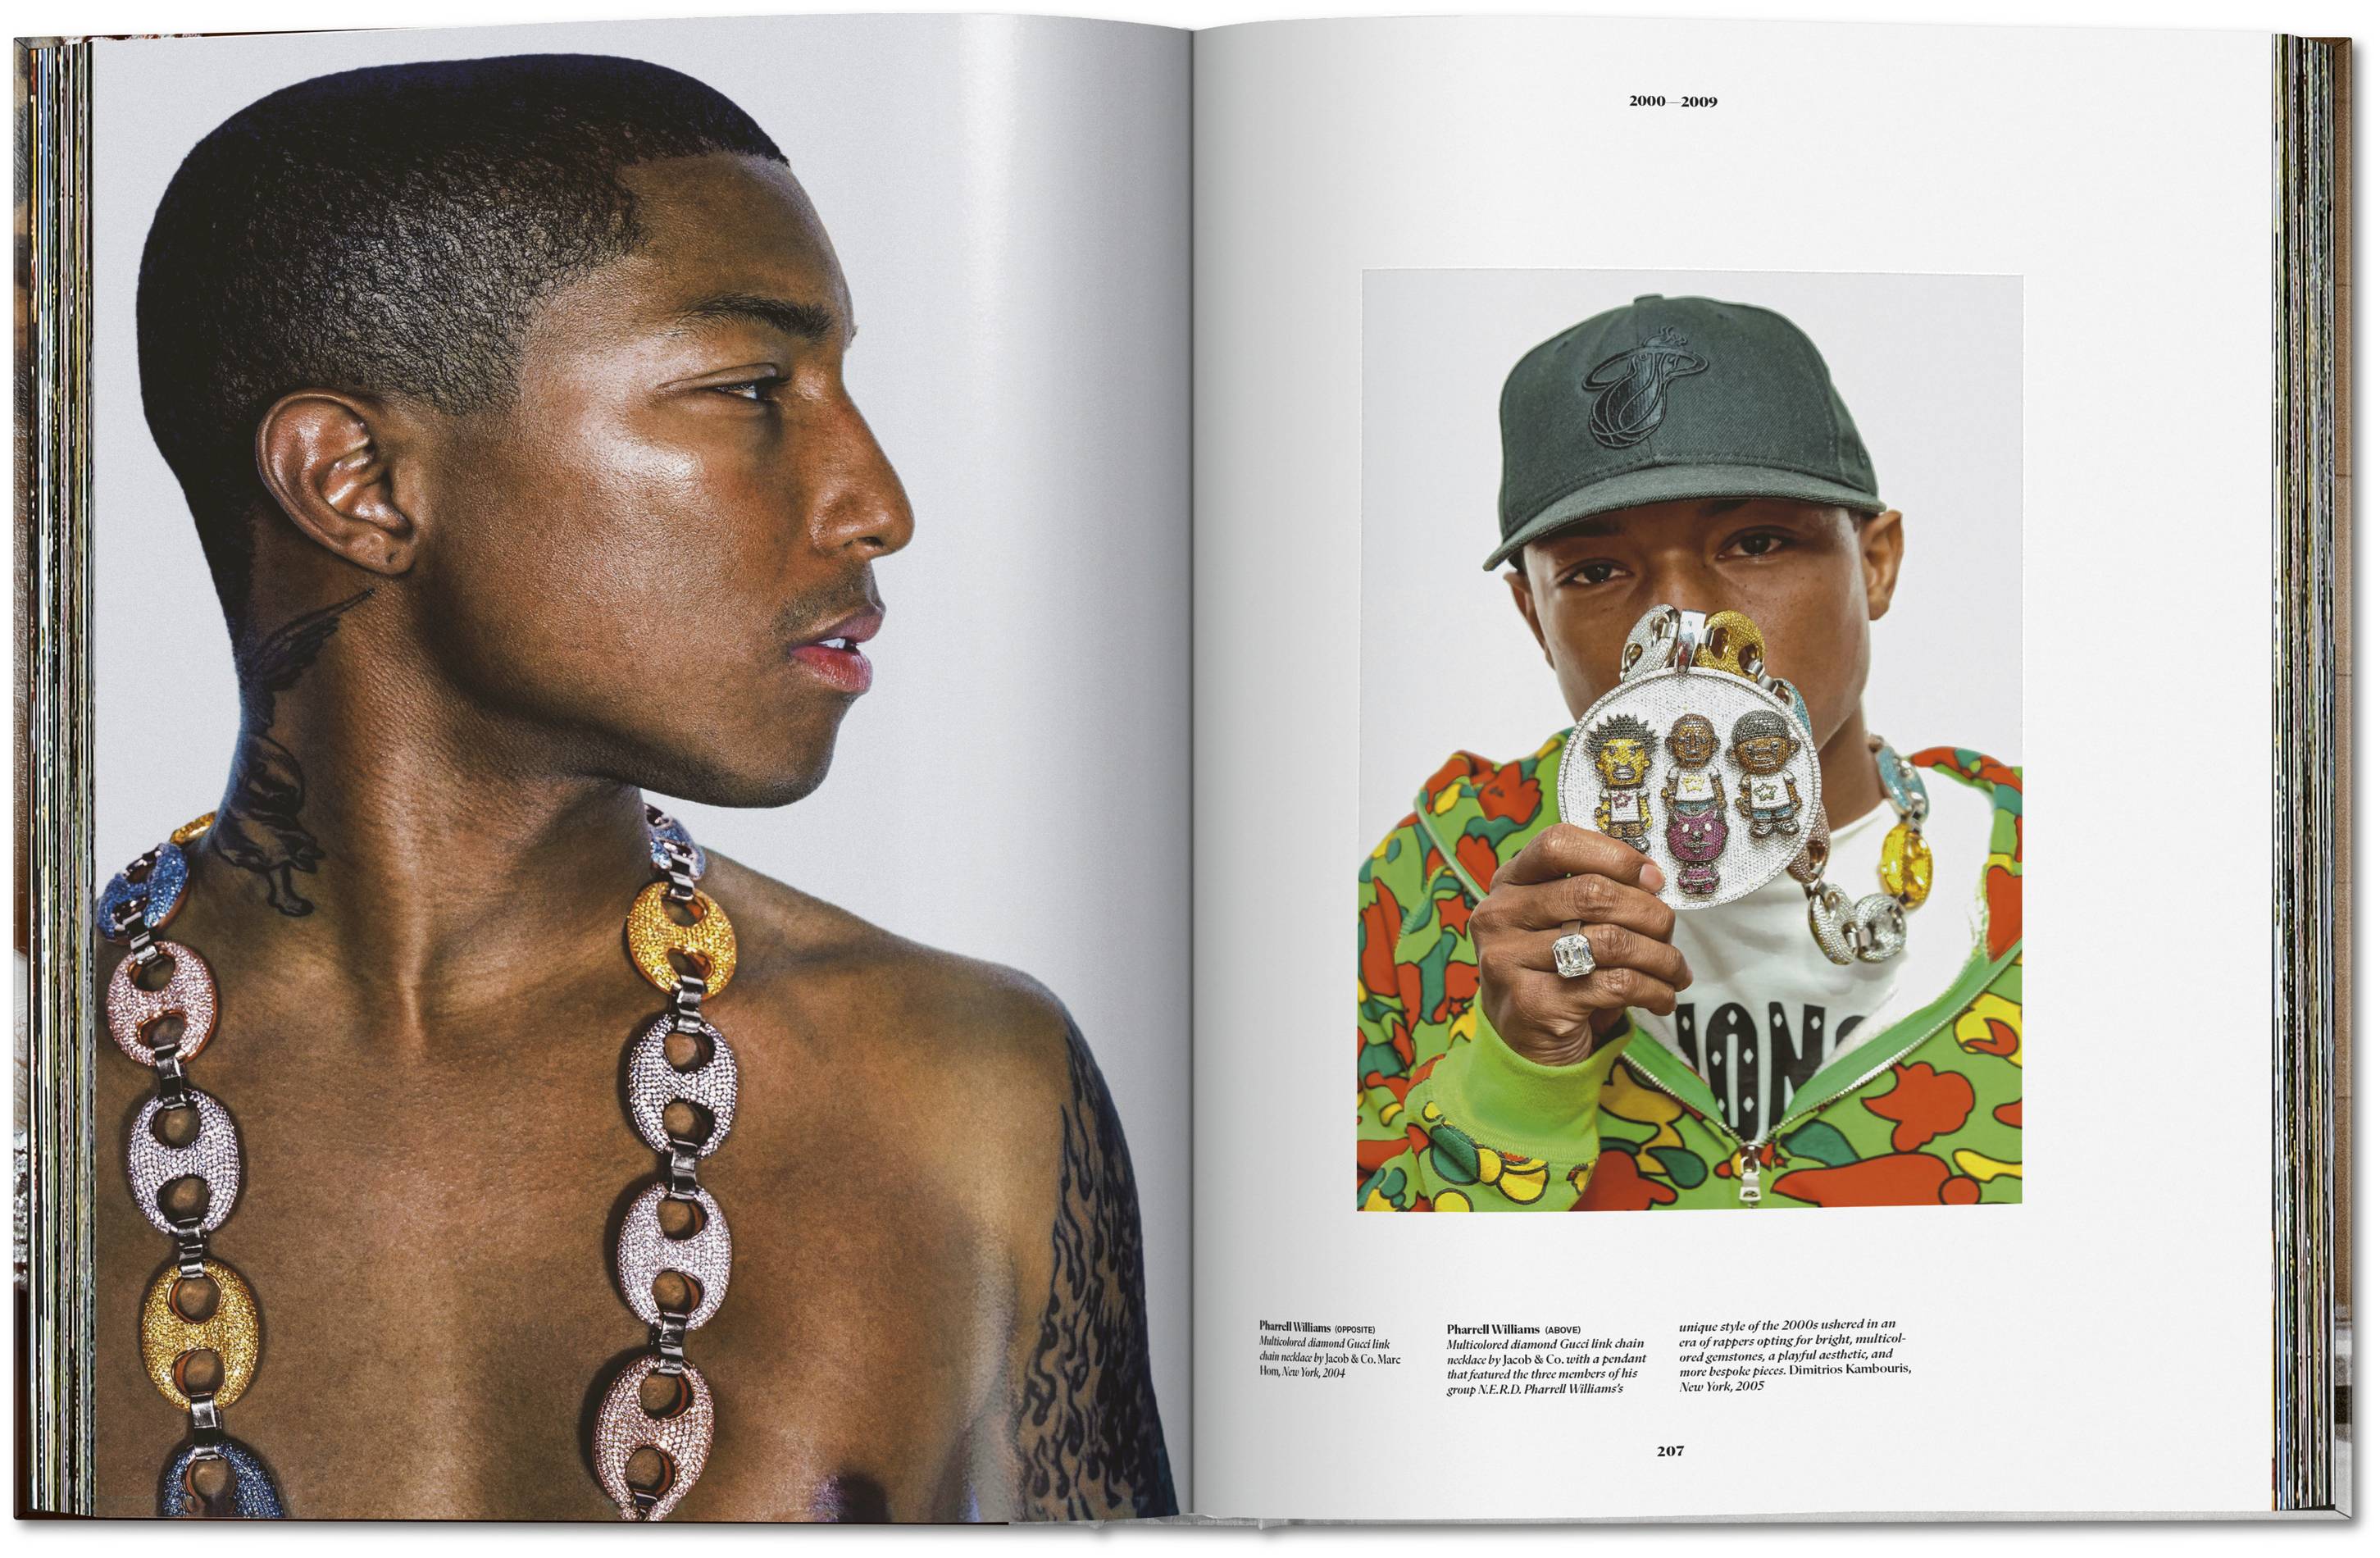 pharrell williams models some of his famous jewelry pieces in a hip-hop book about jewelry